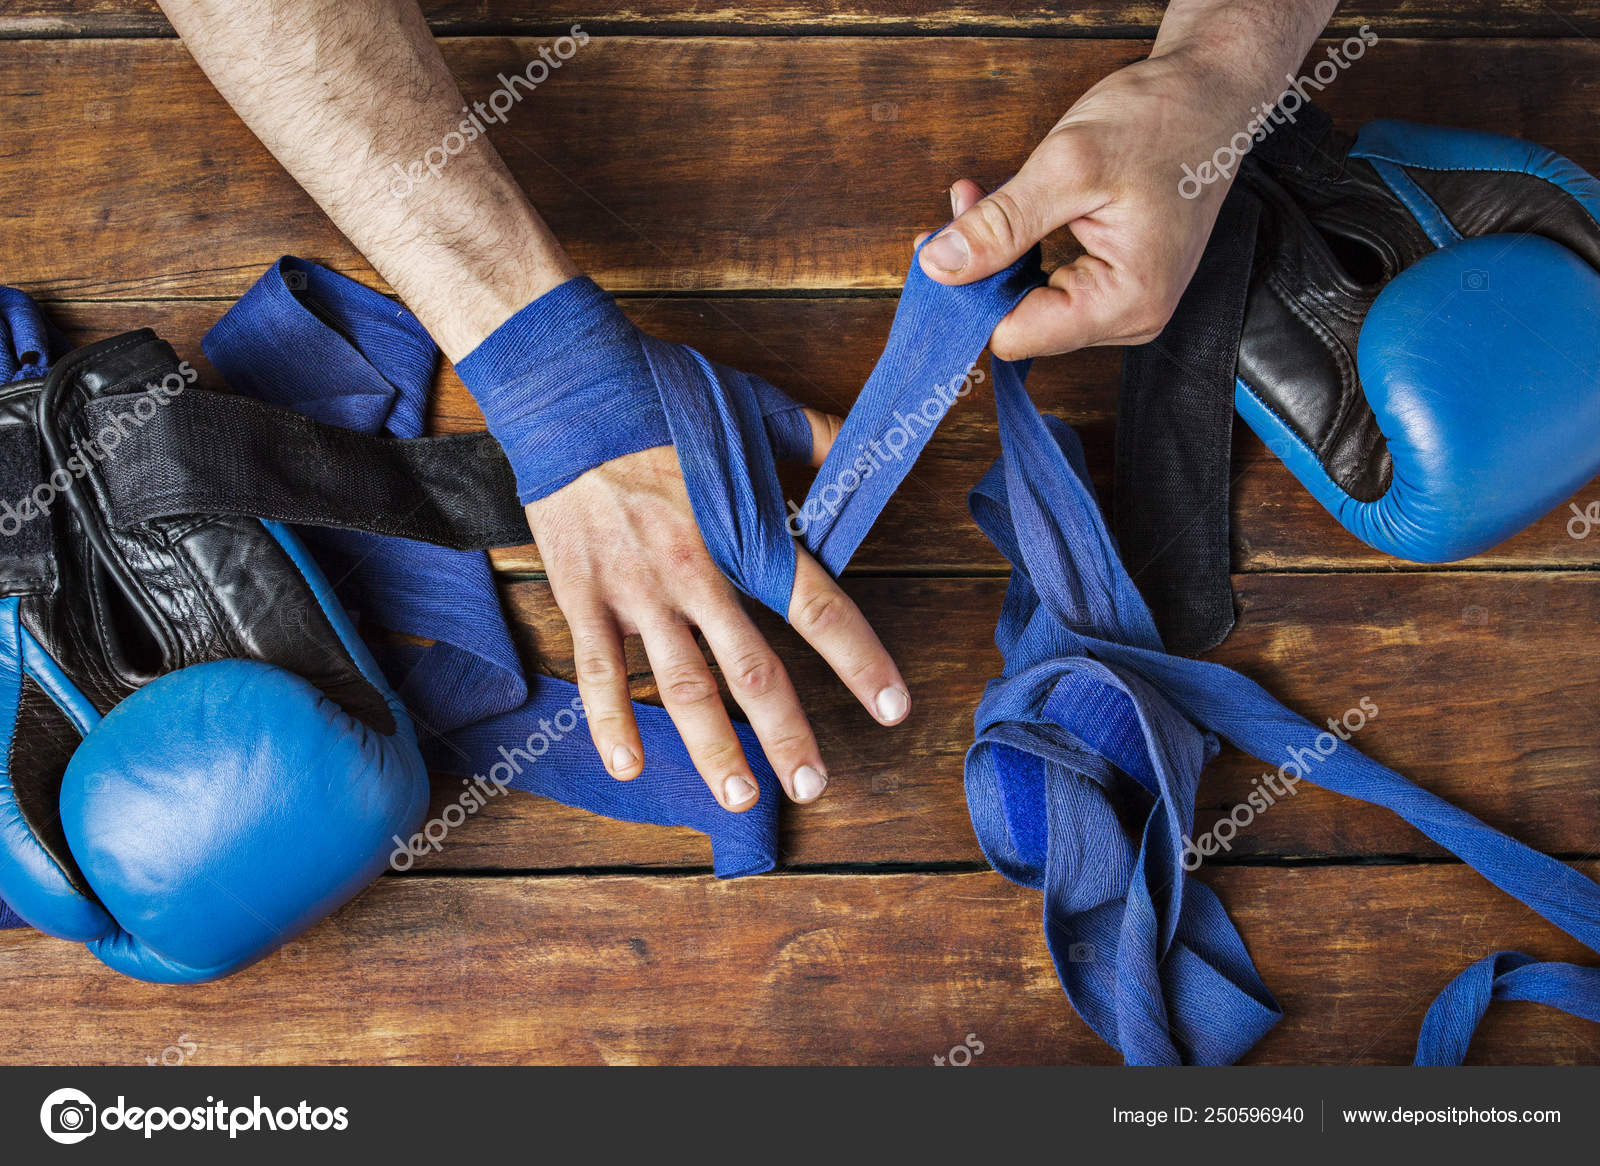 Man bandage boxing tape on his hands before the boxing match on a